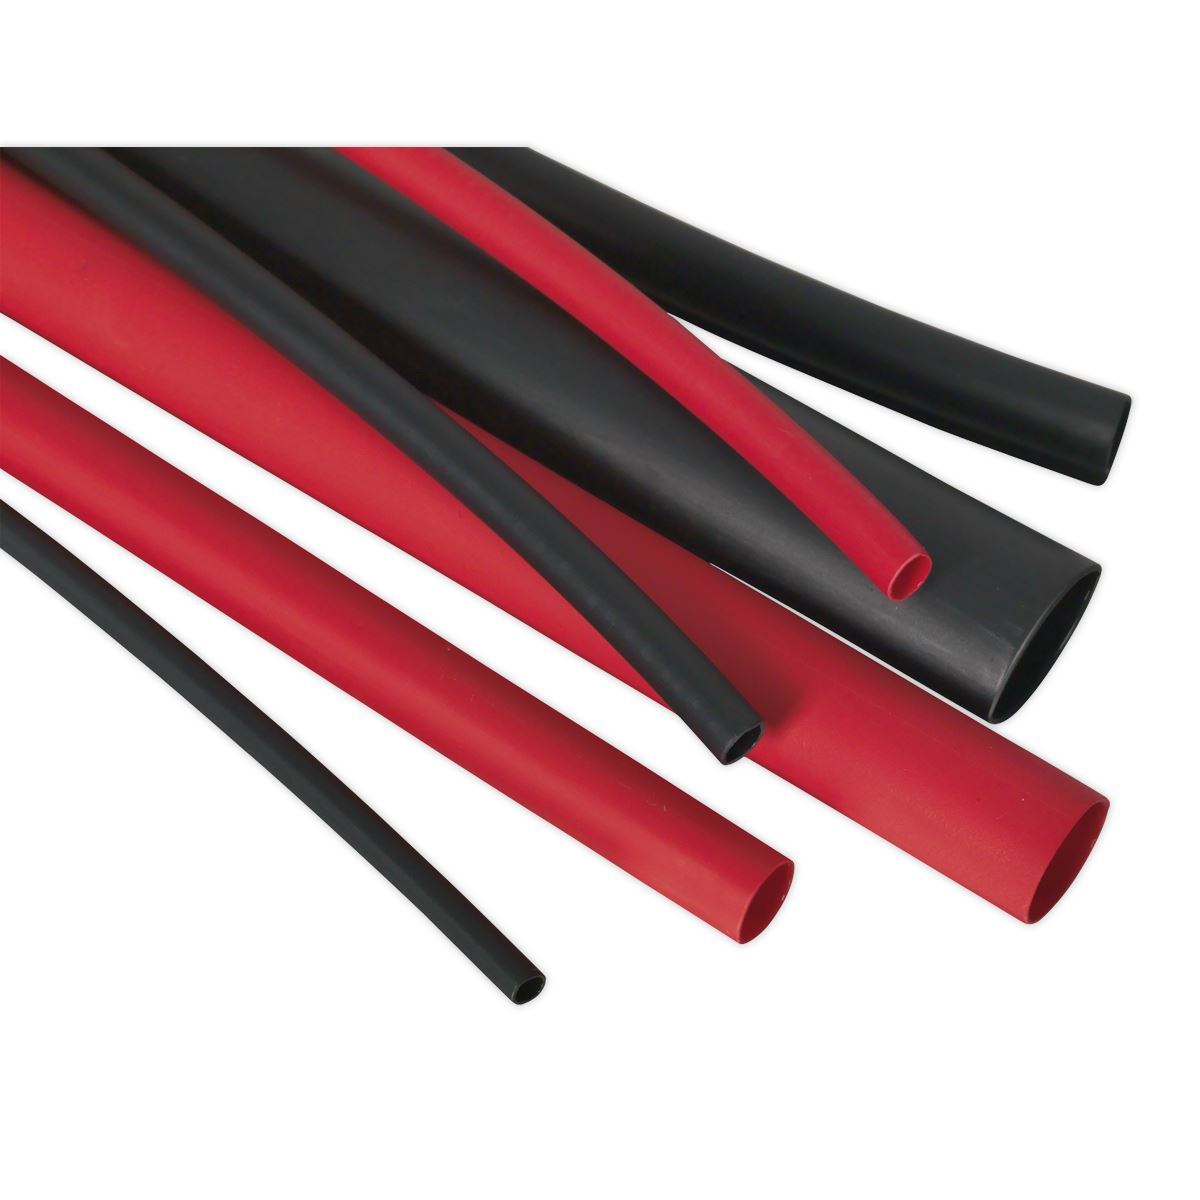 Sealey Heat Shrink Tubing Assortment 72pc Black & Red Adhesive Lined 200mm